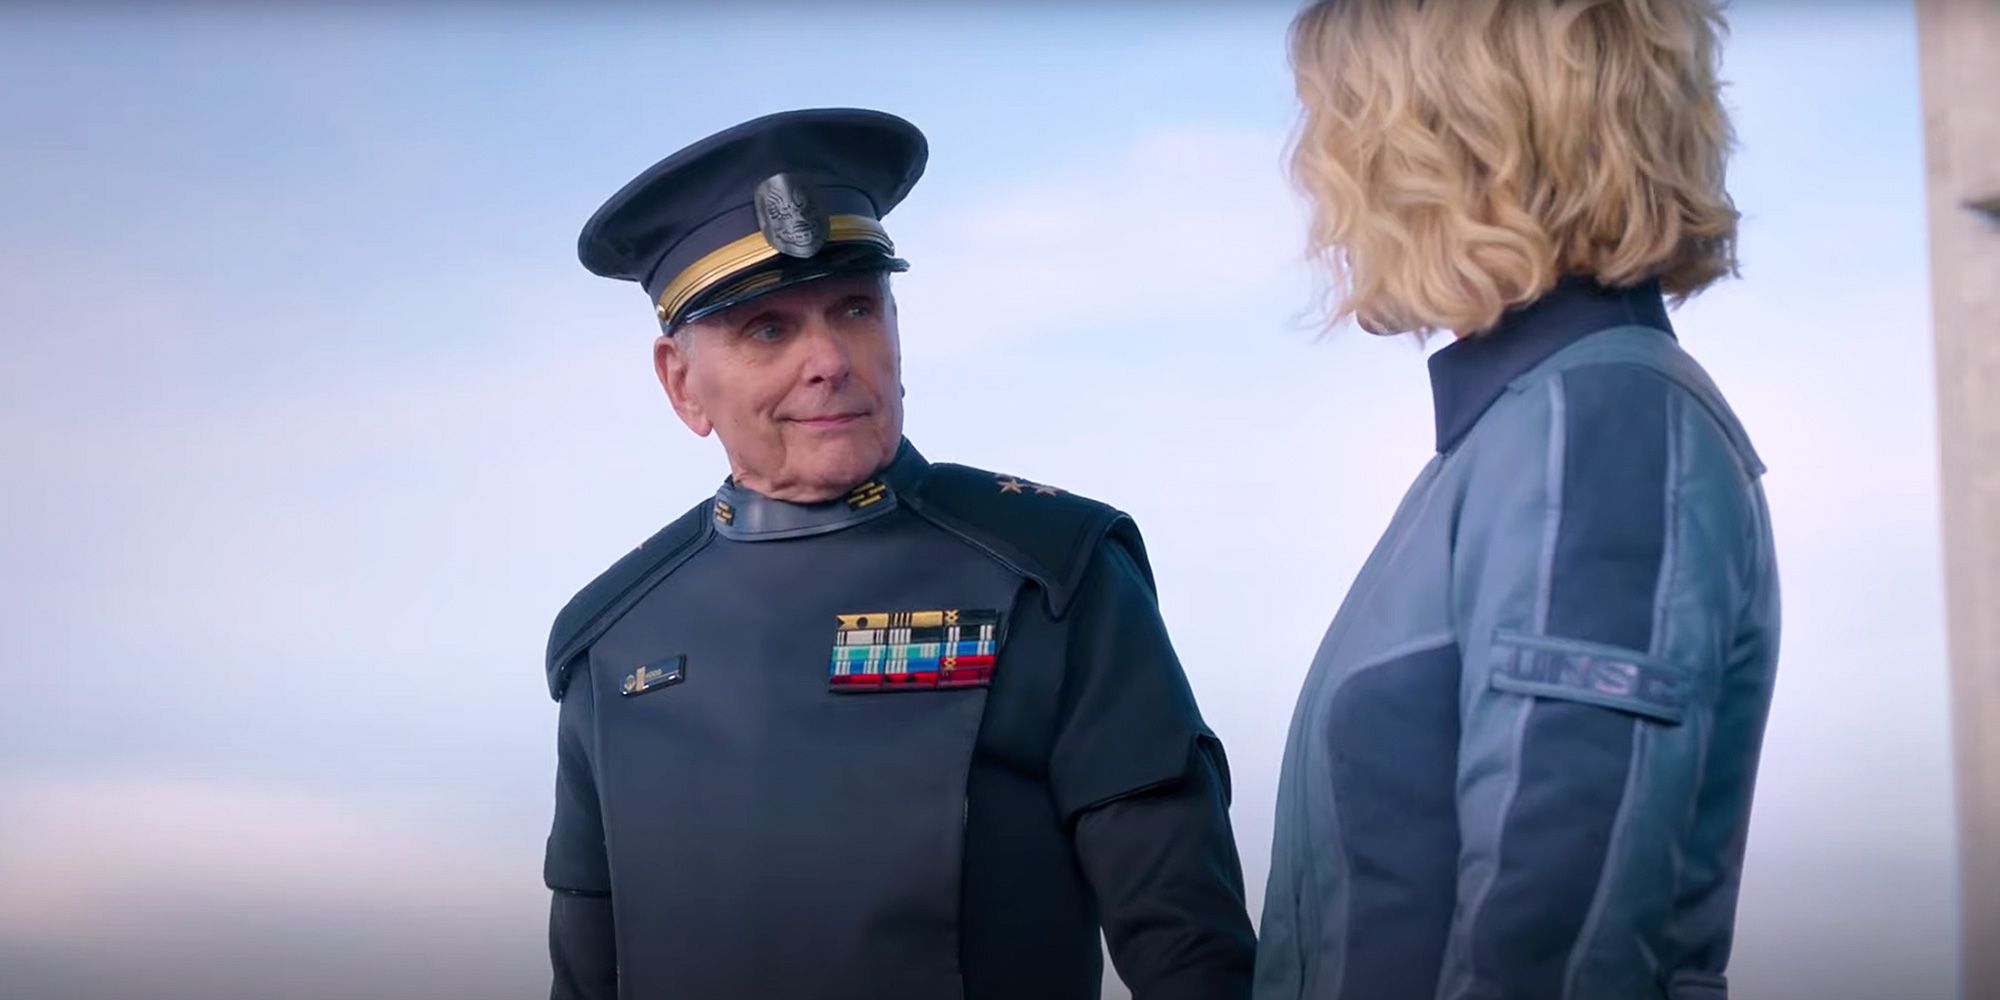 Halo Episode 2 Clip Shows Dr. Halsey Planning To Deal With Master Chief